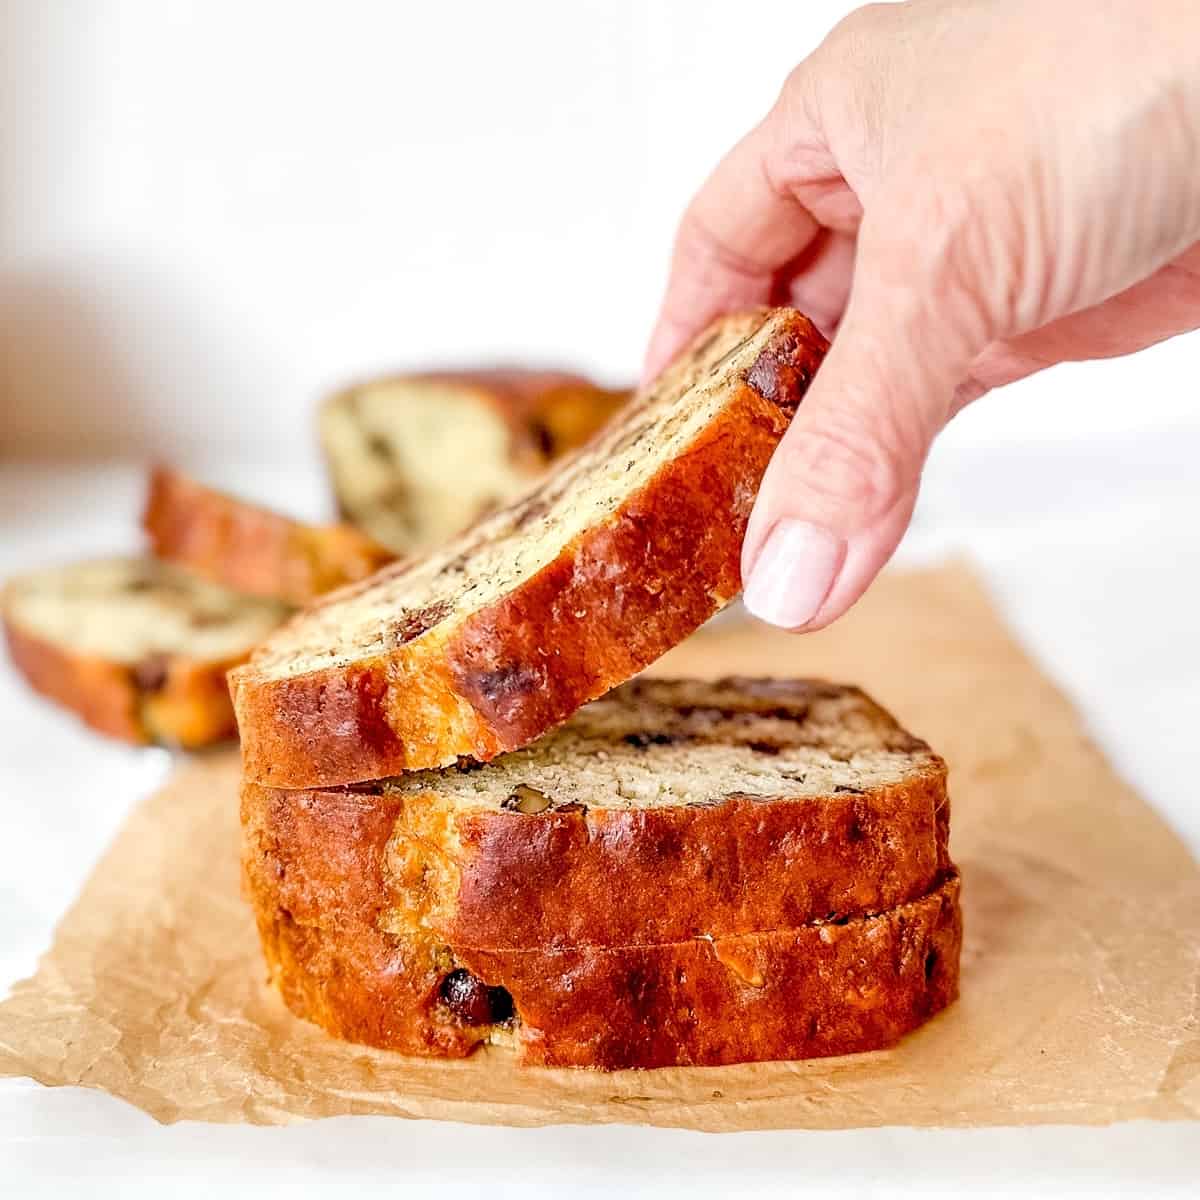 Hand lifting a slice from a stack of banana bread slices.